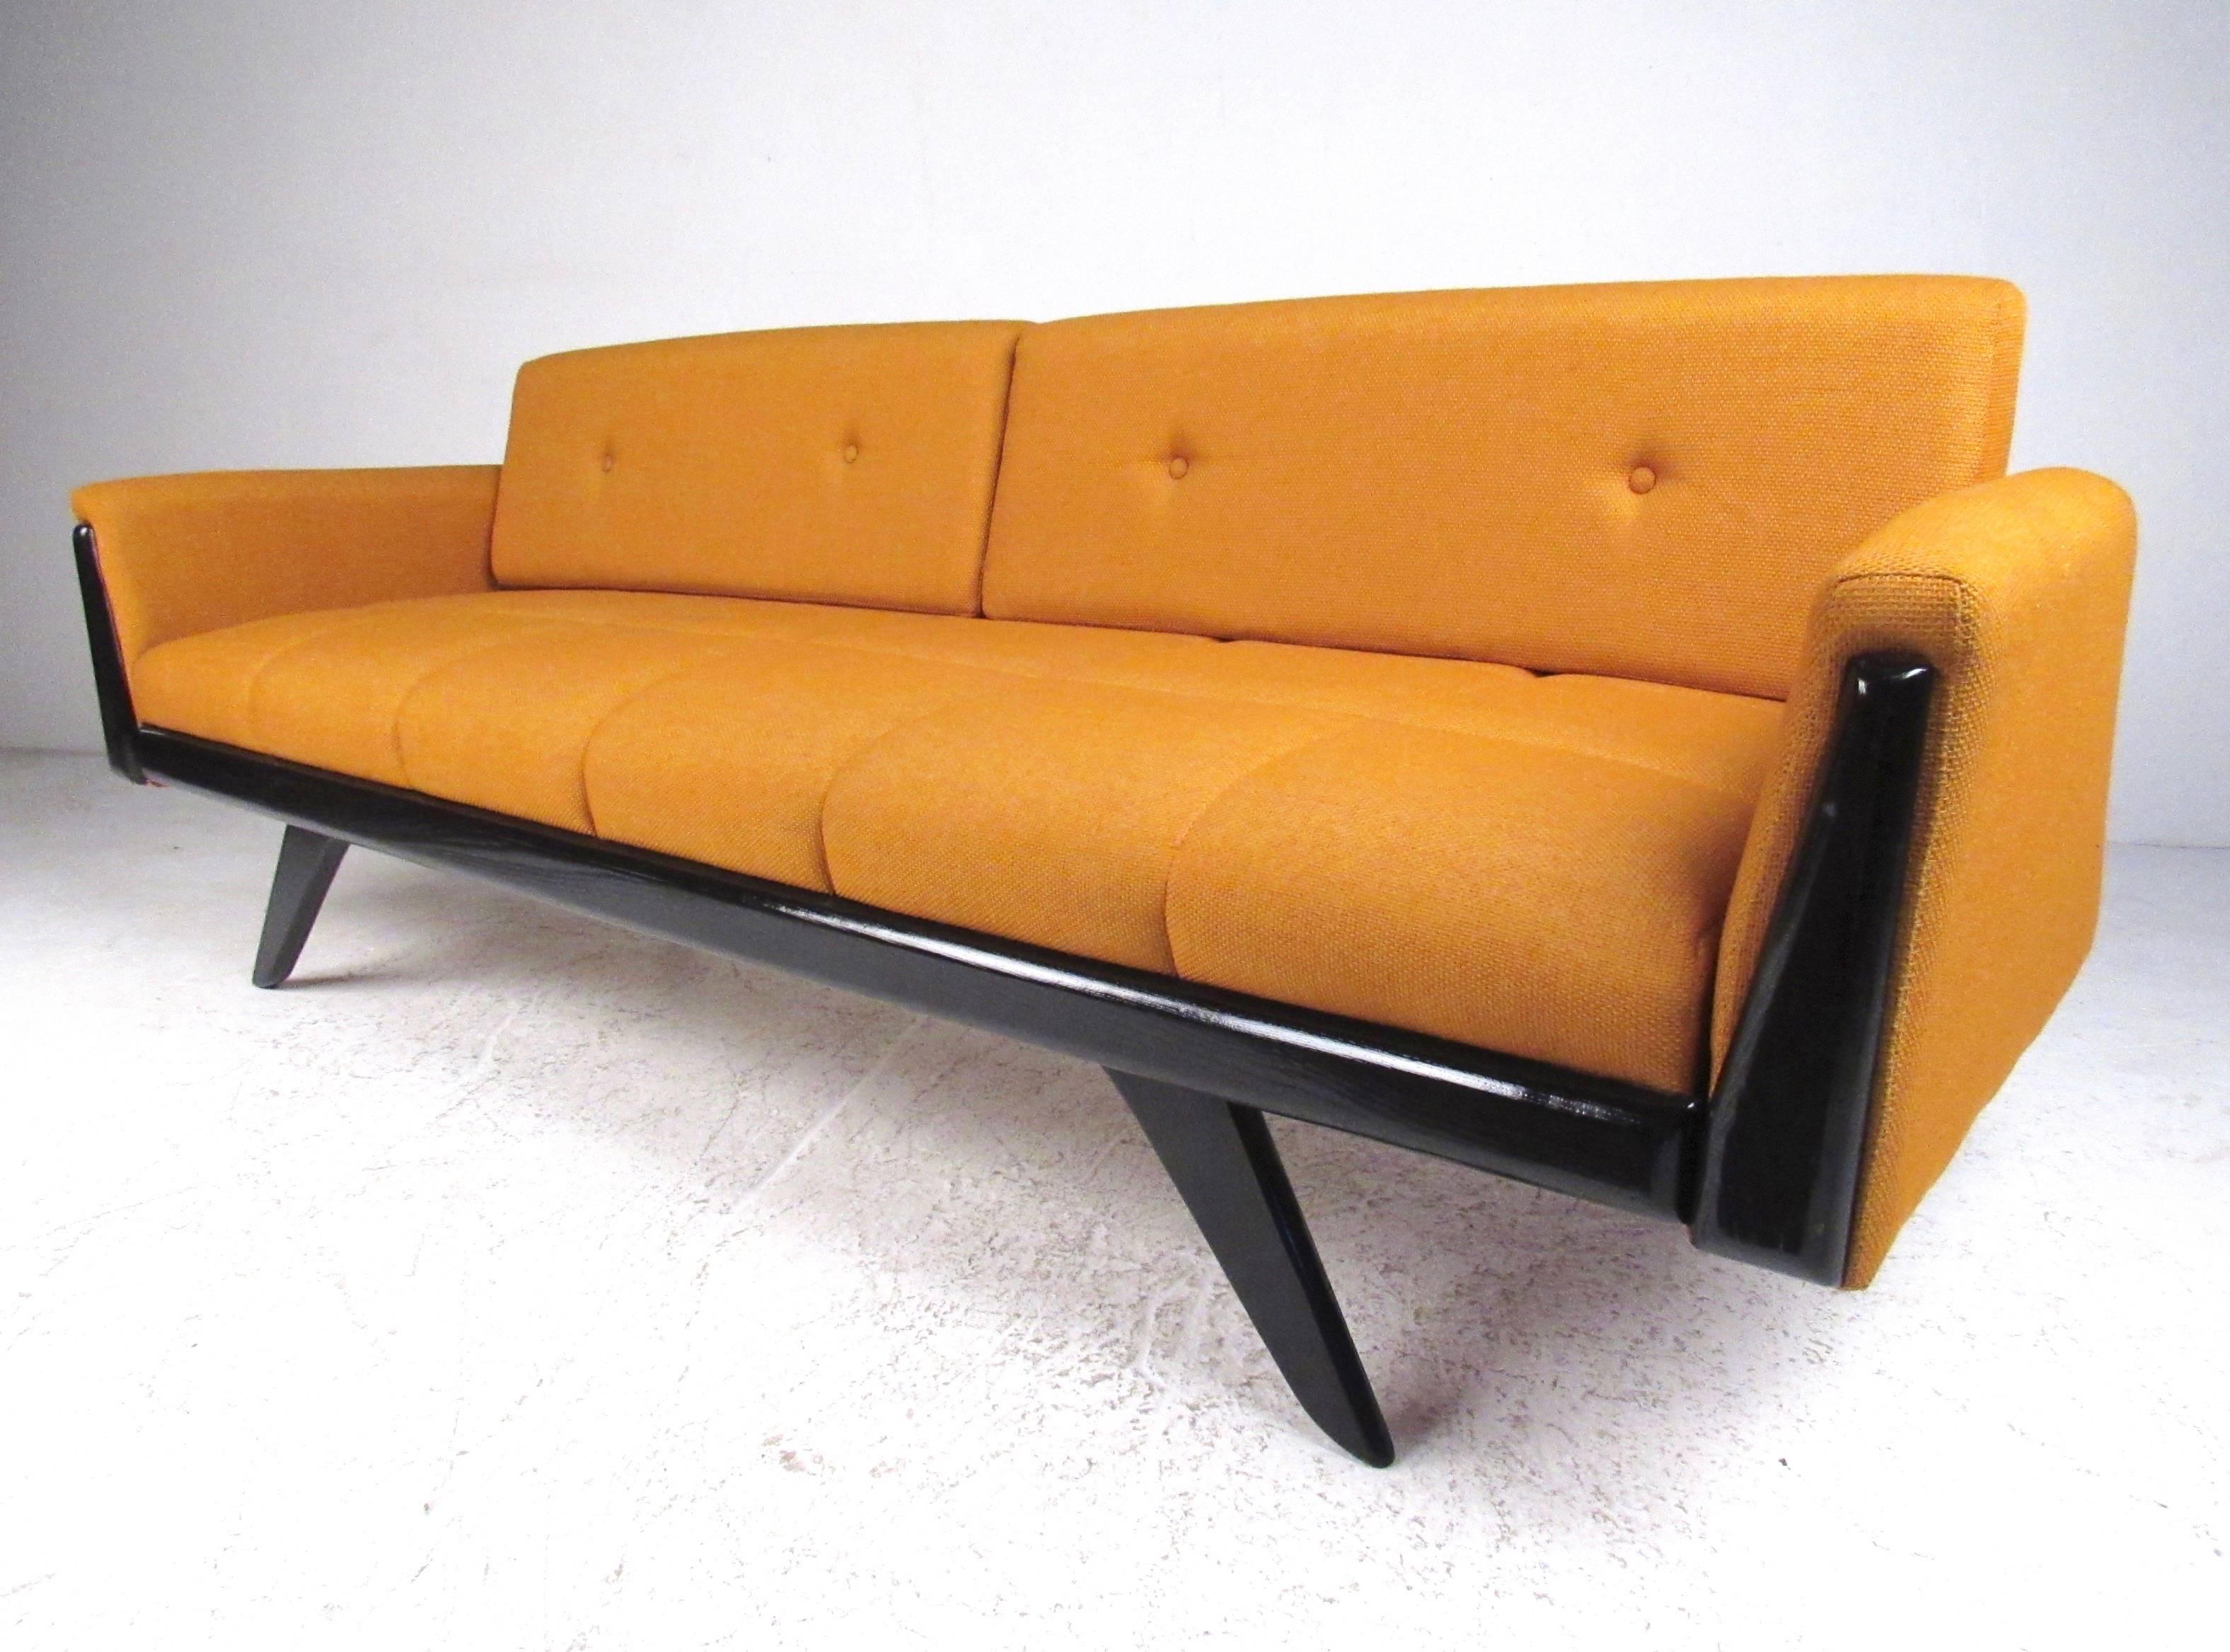 This gorgeous vintage sofa features Pearsall style frame, tapered legs, and tufted orange fabric. Wonderful mix of mid-century atomic design and tieless comfort. Please confirm item location (NY or NJ).